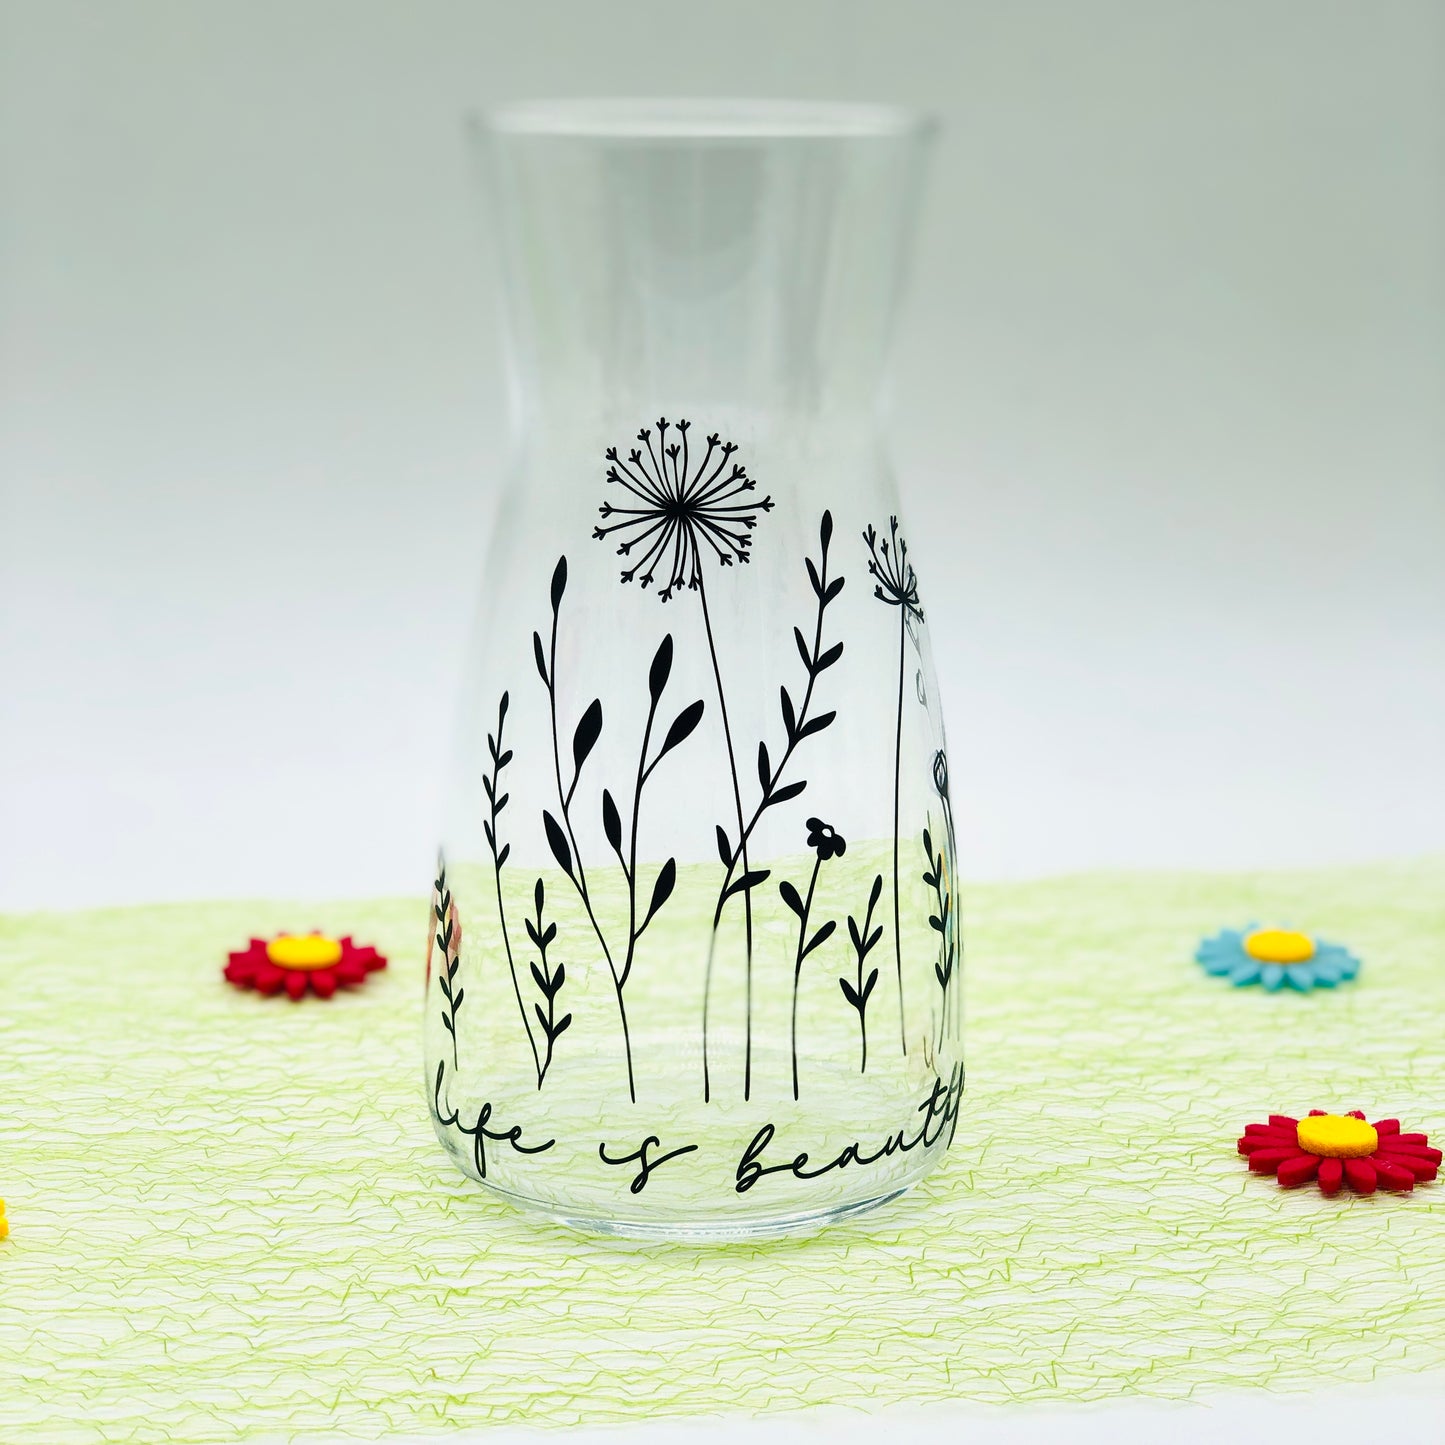 Flower vase personalized with flower meadow - glass vase gift birthday, Mother's Day, anniversary - table decoration - water carafe - vase